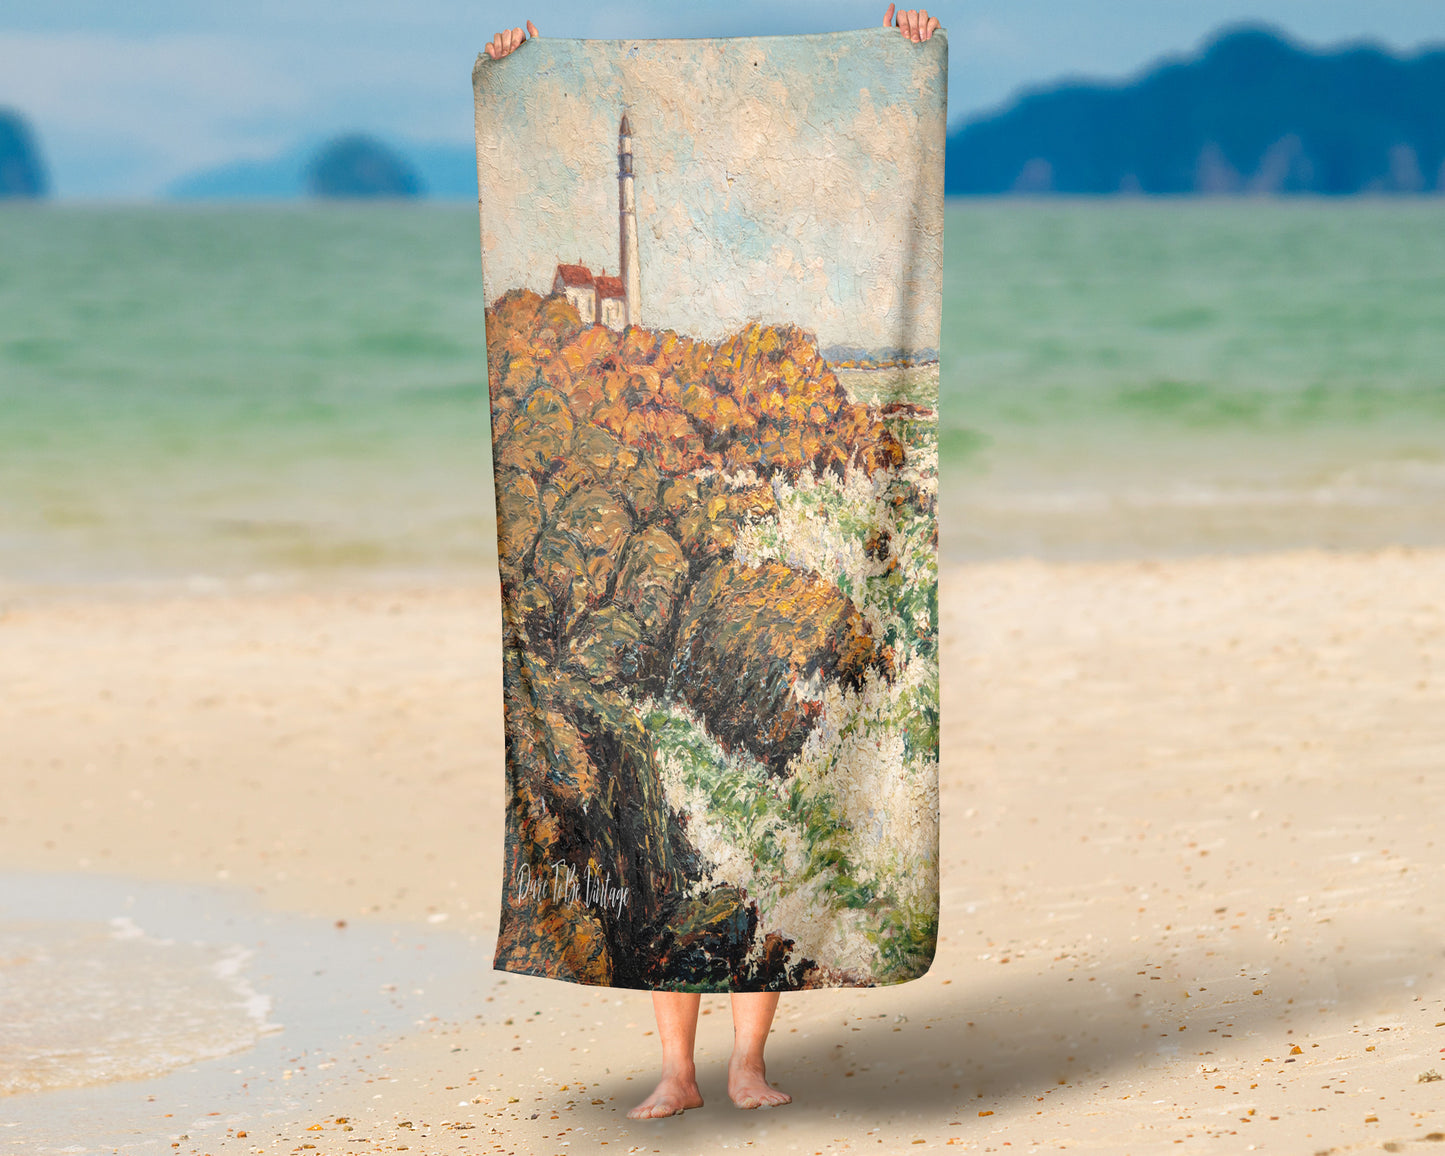 "Lighthouse Keeper" Woven Throw Blanket Wall Tapestry